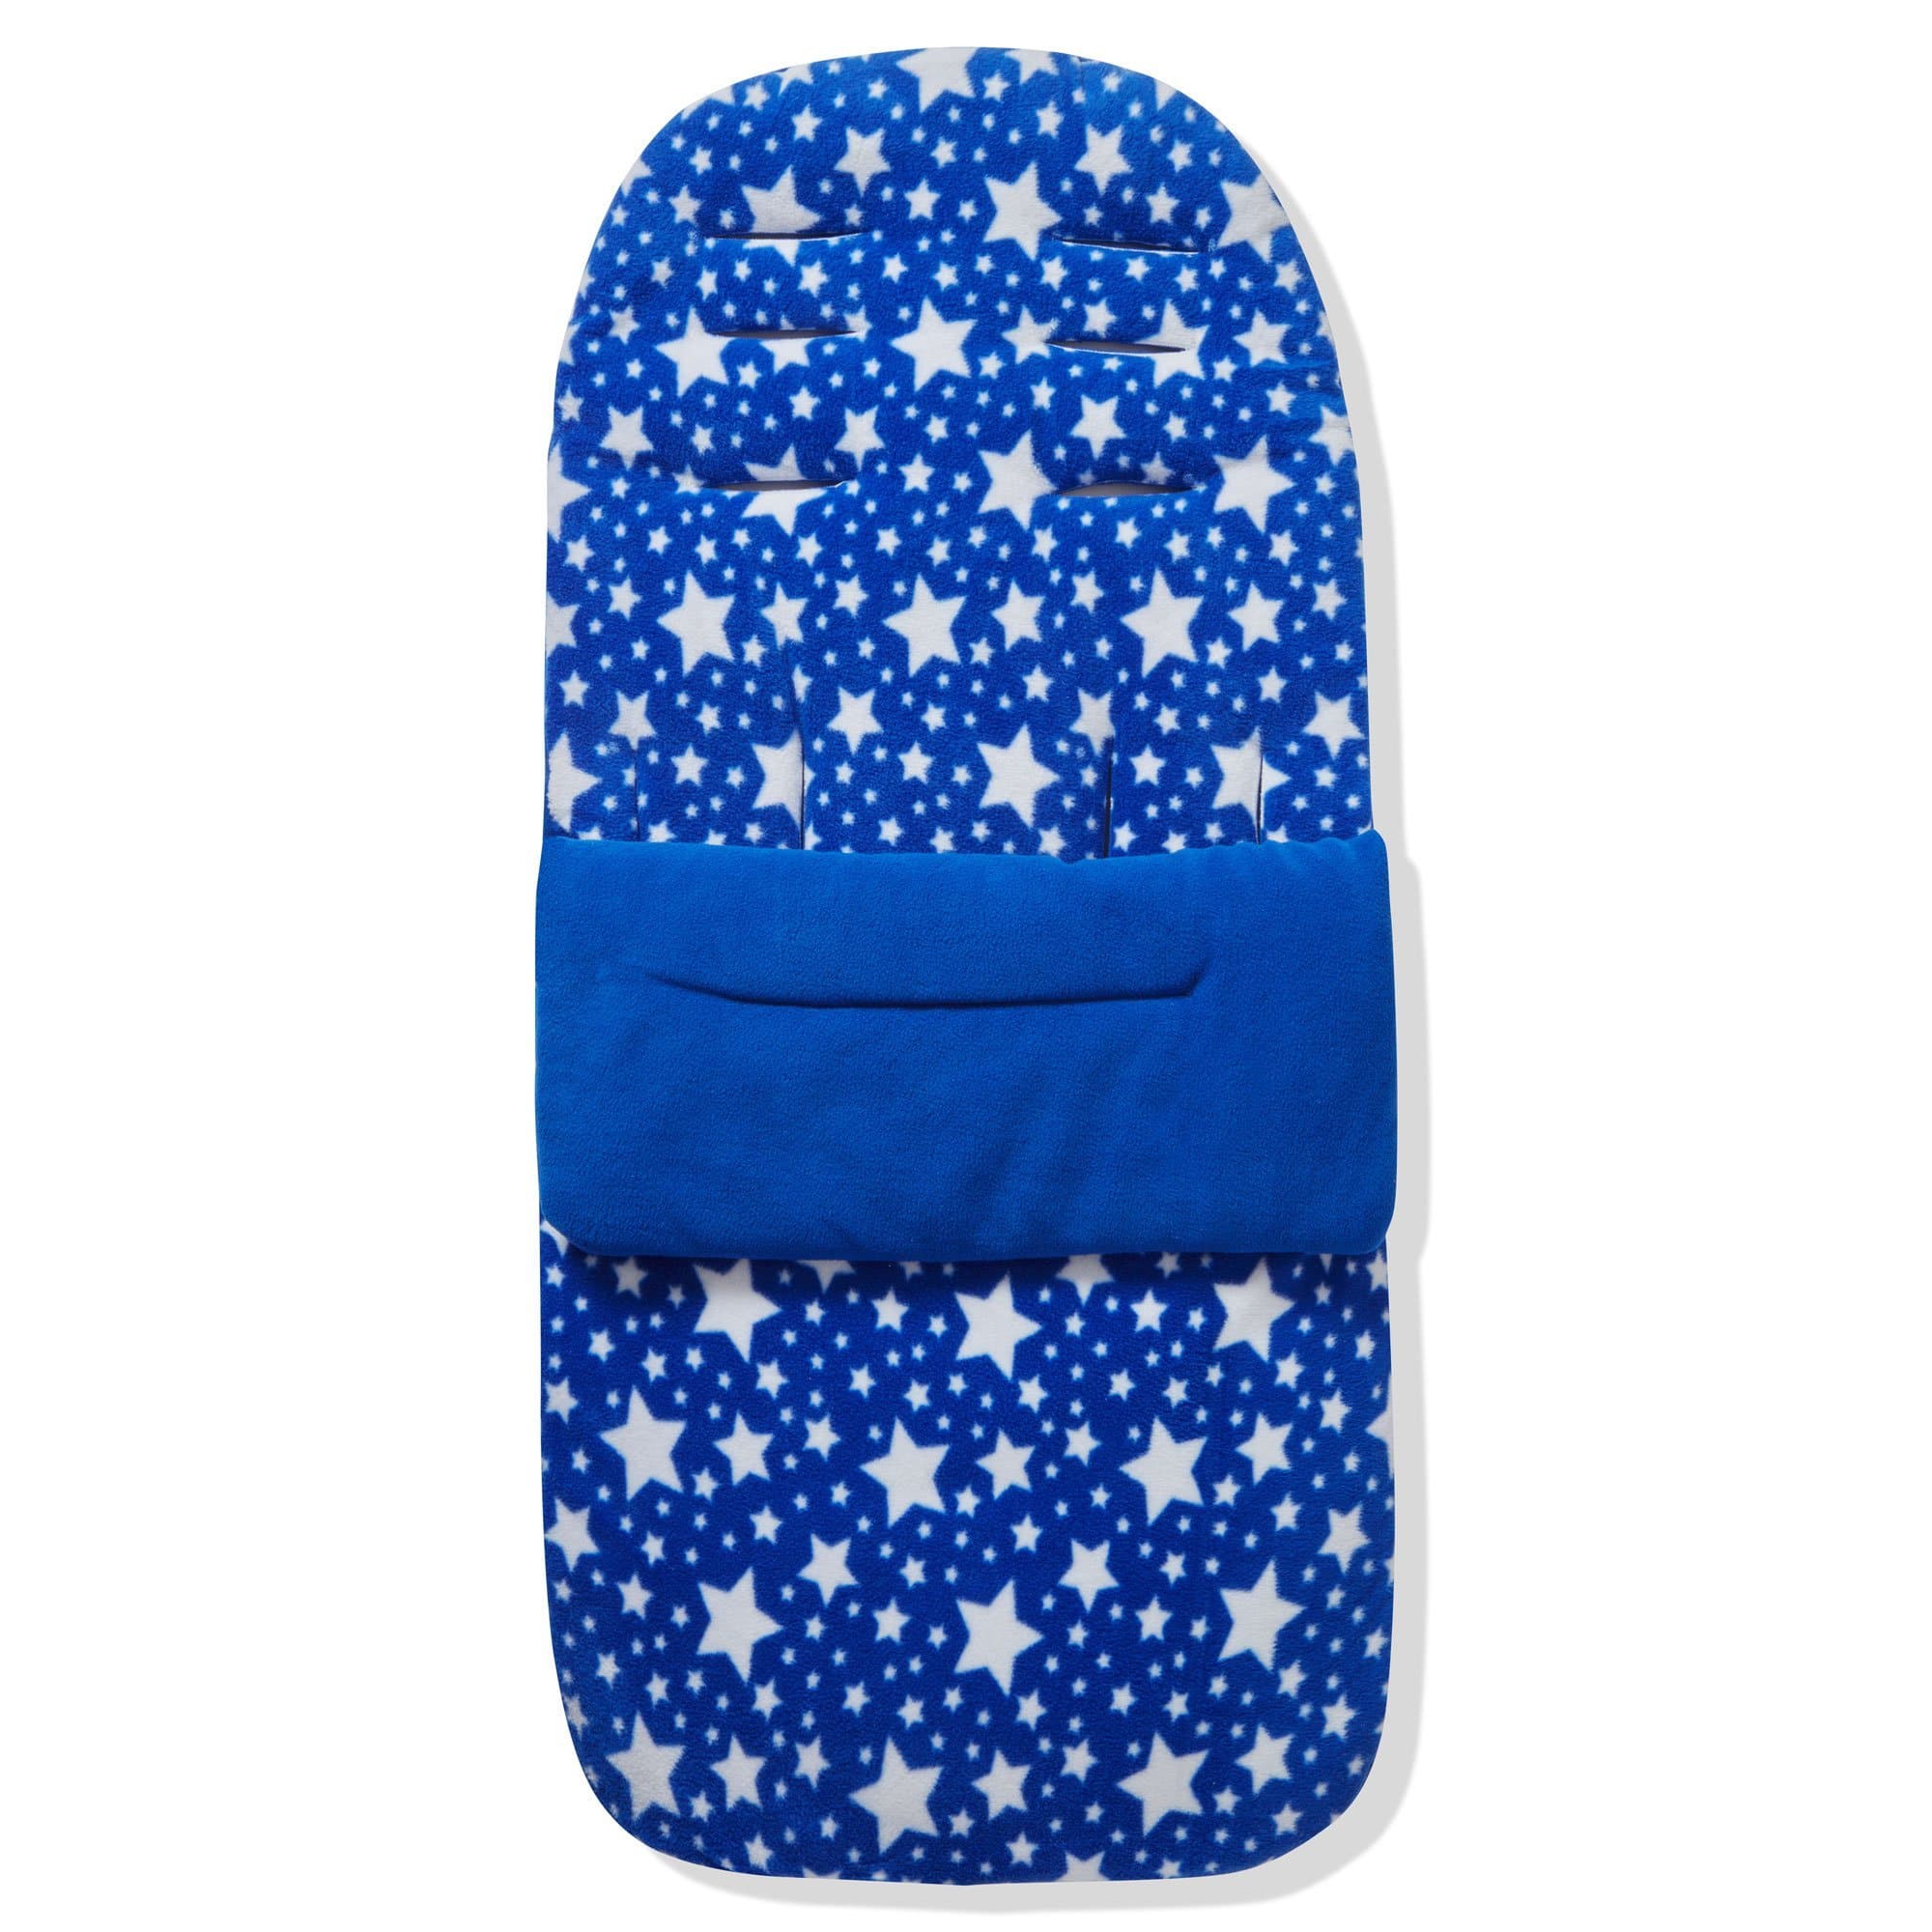 Fleece Footmuff / Cosy Toes Compatible with Petite - For Your Little One